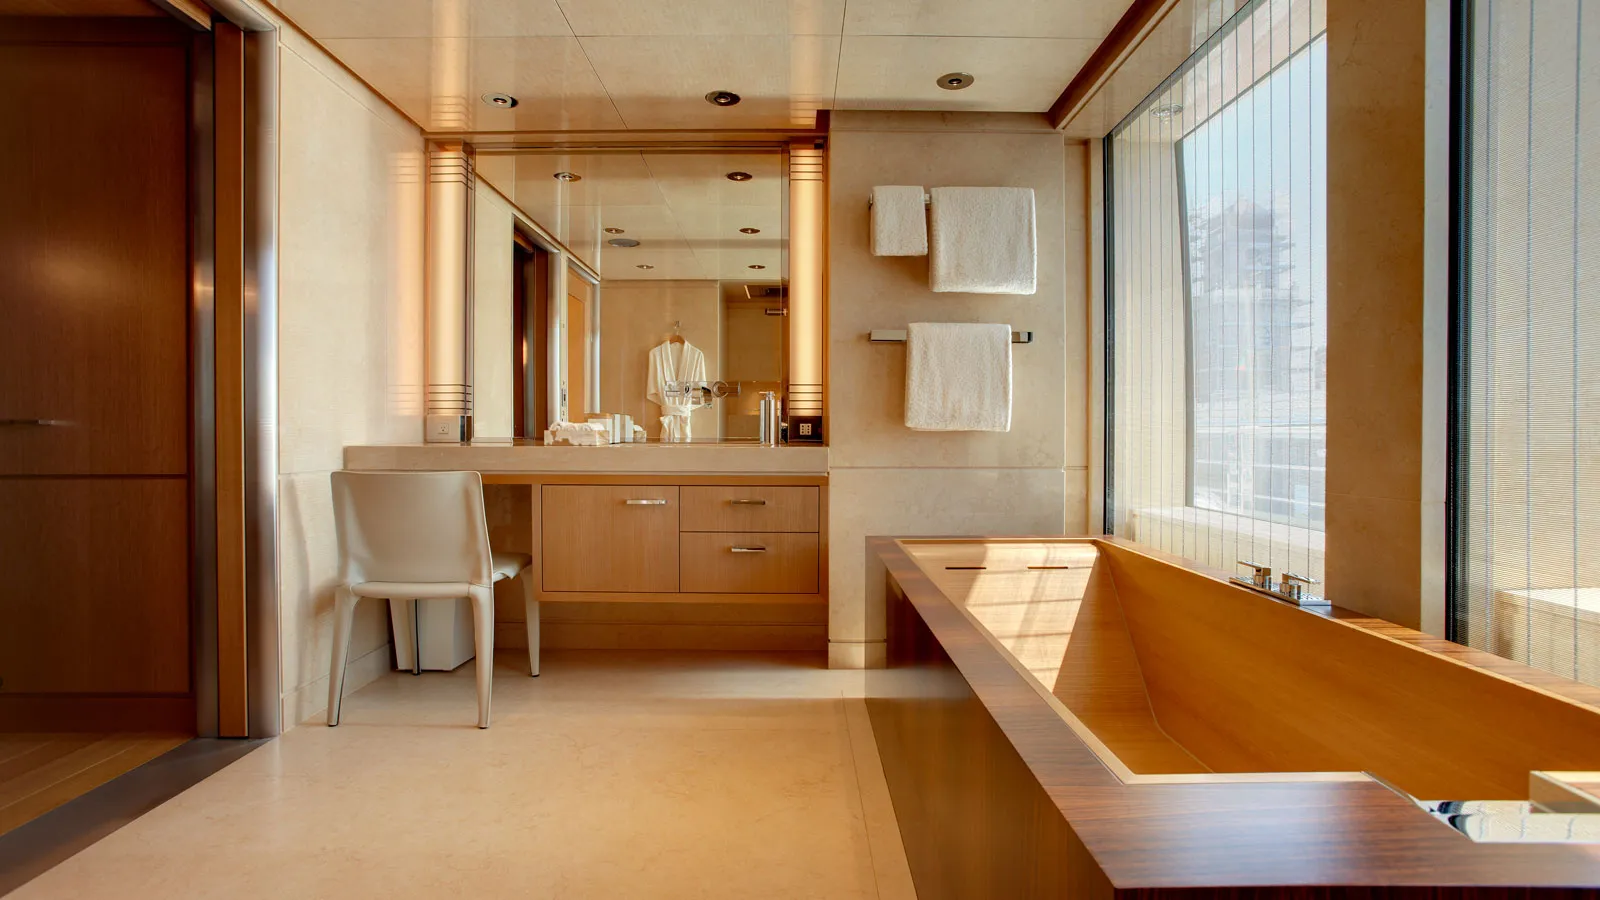 Inside the US billionaire's $ 160 million Japanese-style superyacht, look at the interior and don't want to leave - Photo 12.